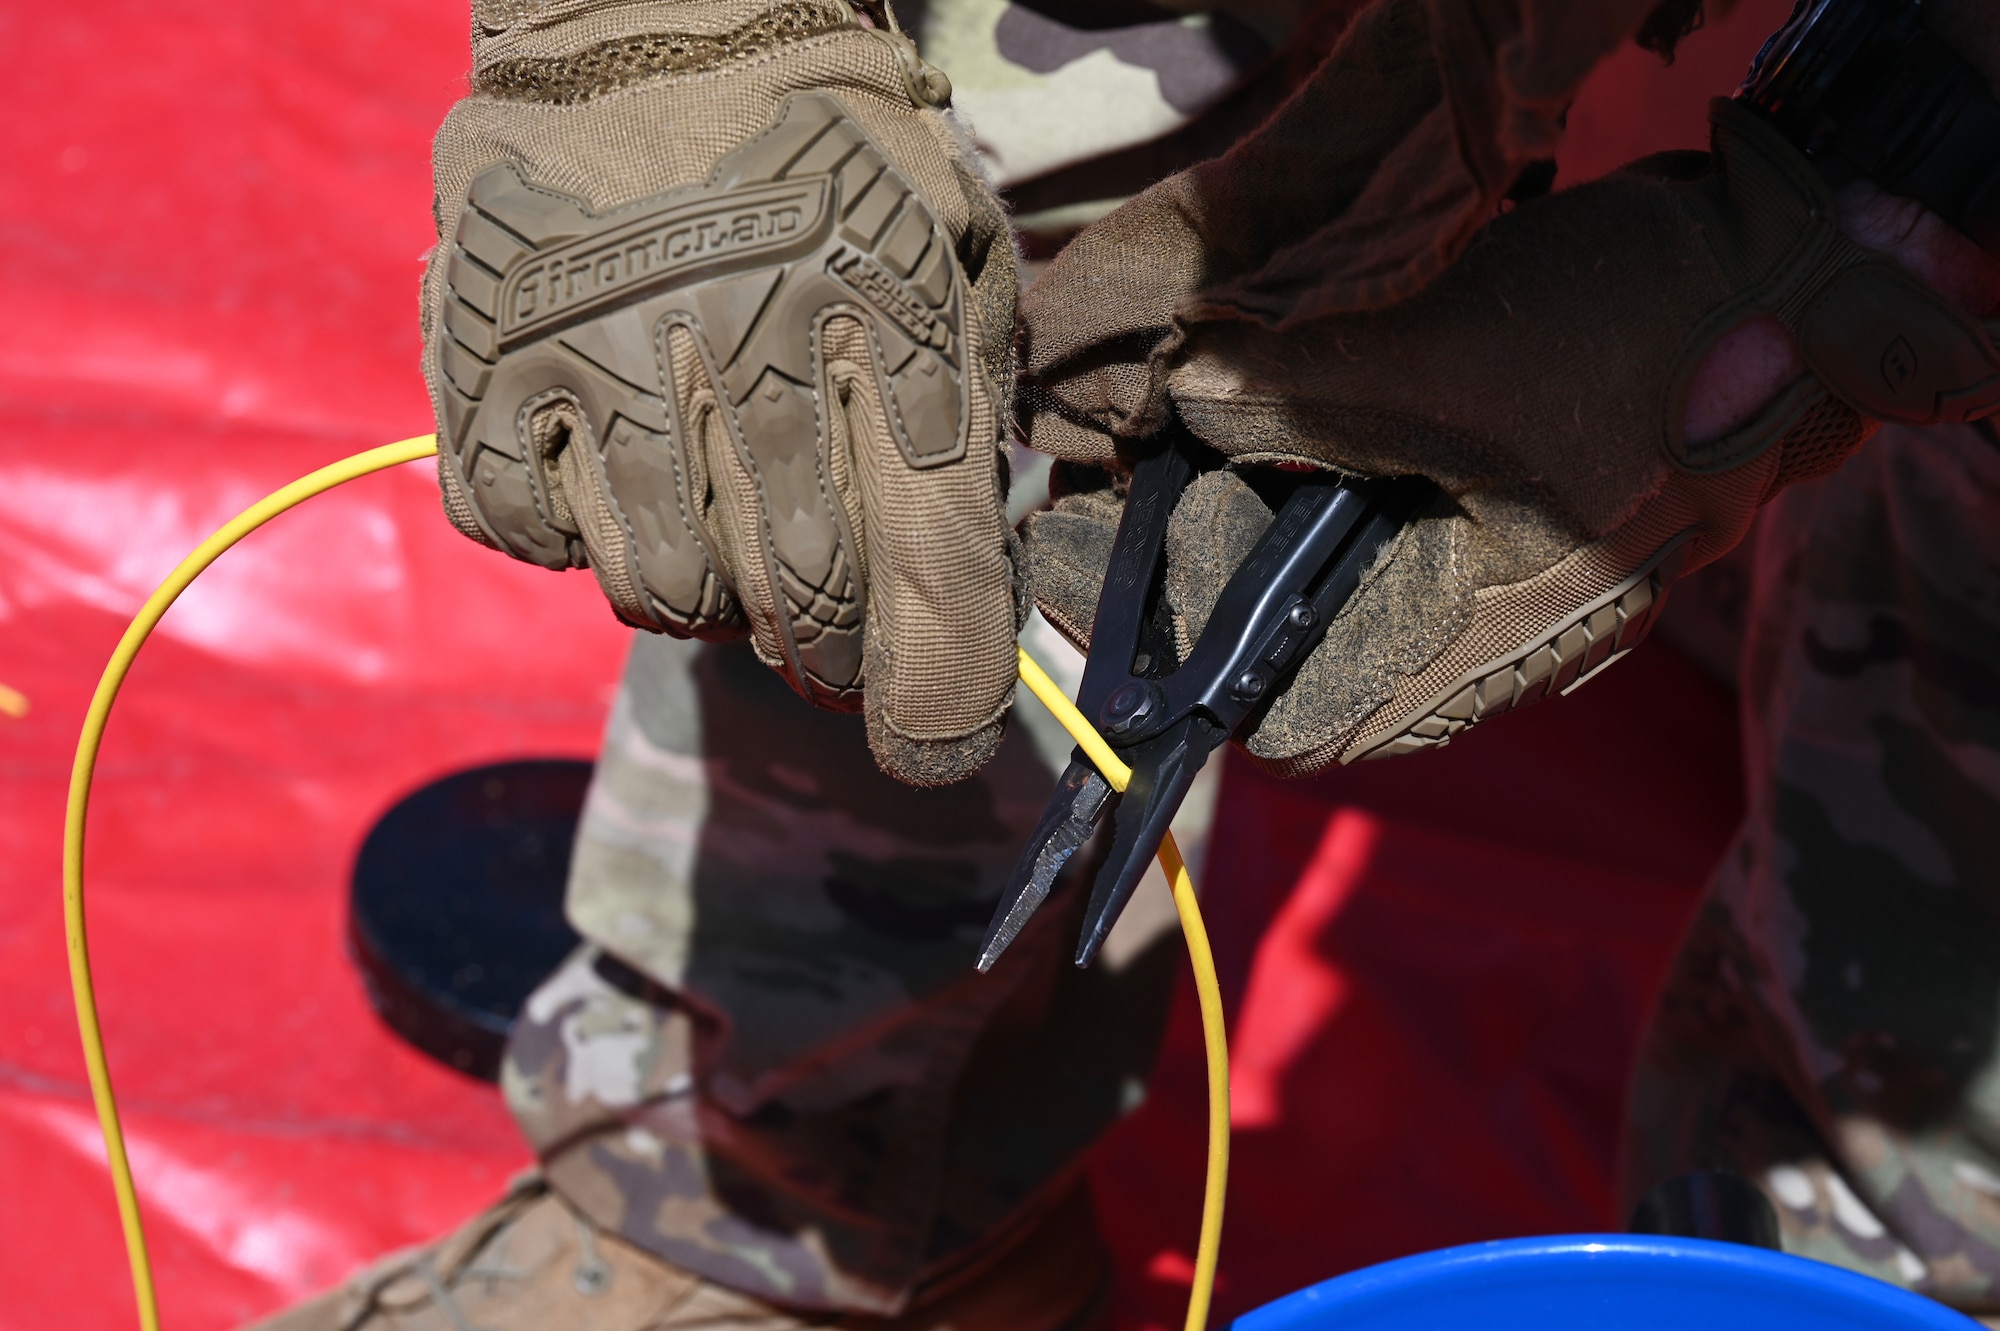 An Airman uses a cutter to cut a wire.